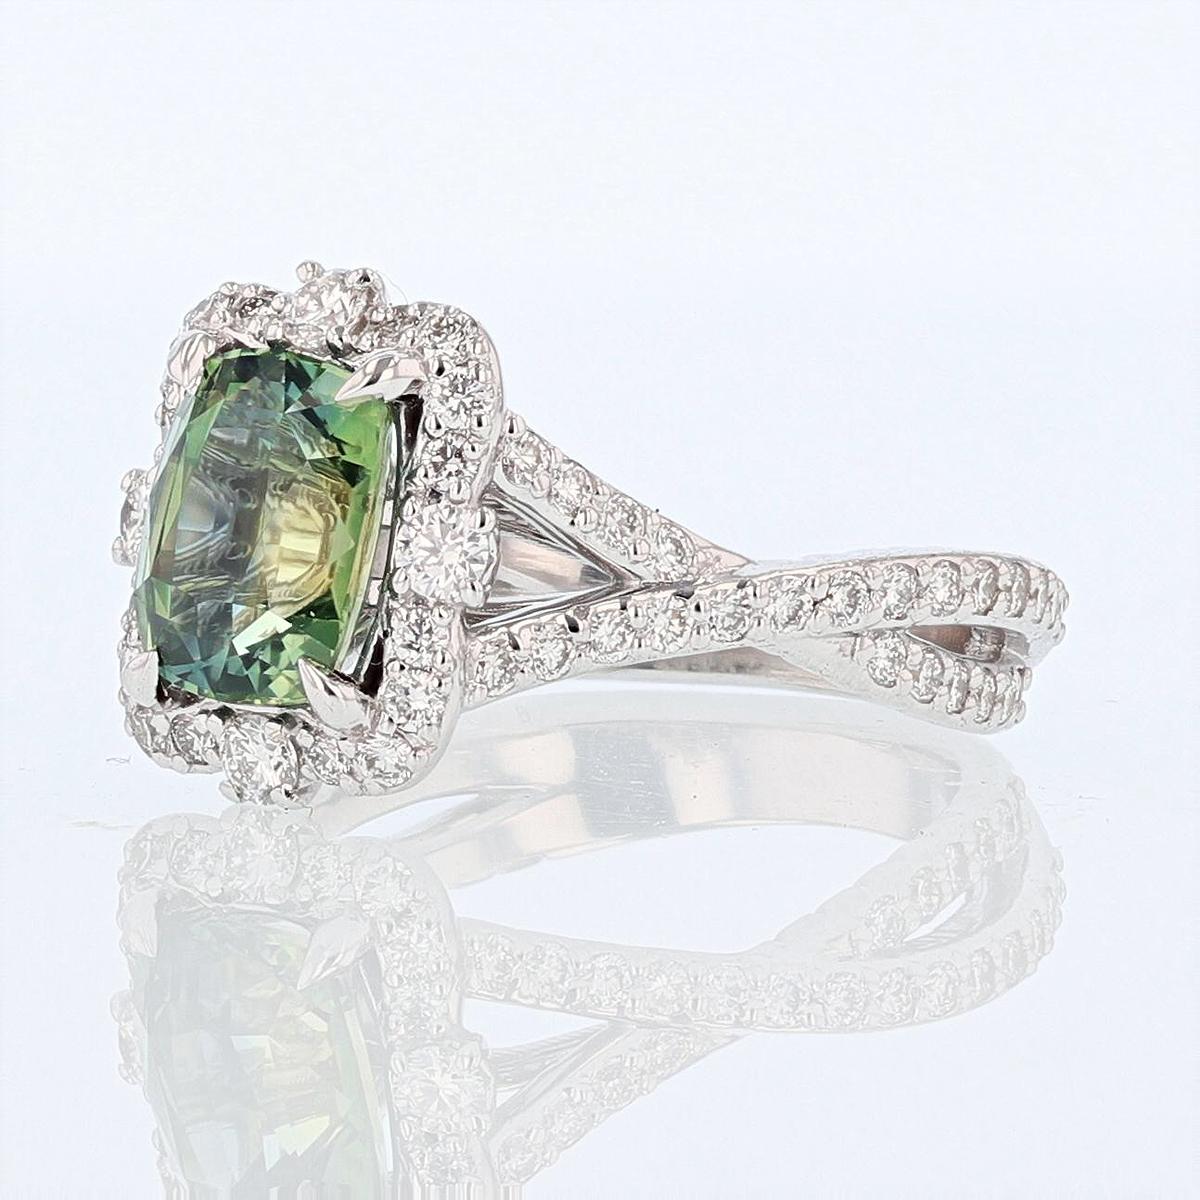 This ring is designed by Nazarelle and made in 14 karat white gold and and features a 2.51ct cushion cut green sapphire, prong set. It also features 68 round cut diamonds weighing 0.80ct, with a color grade (G) and clarity grade (VS1/VS2).